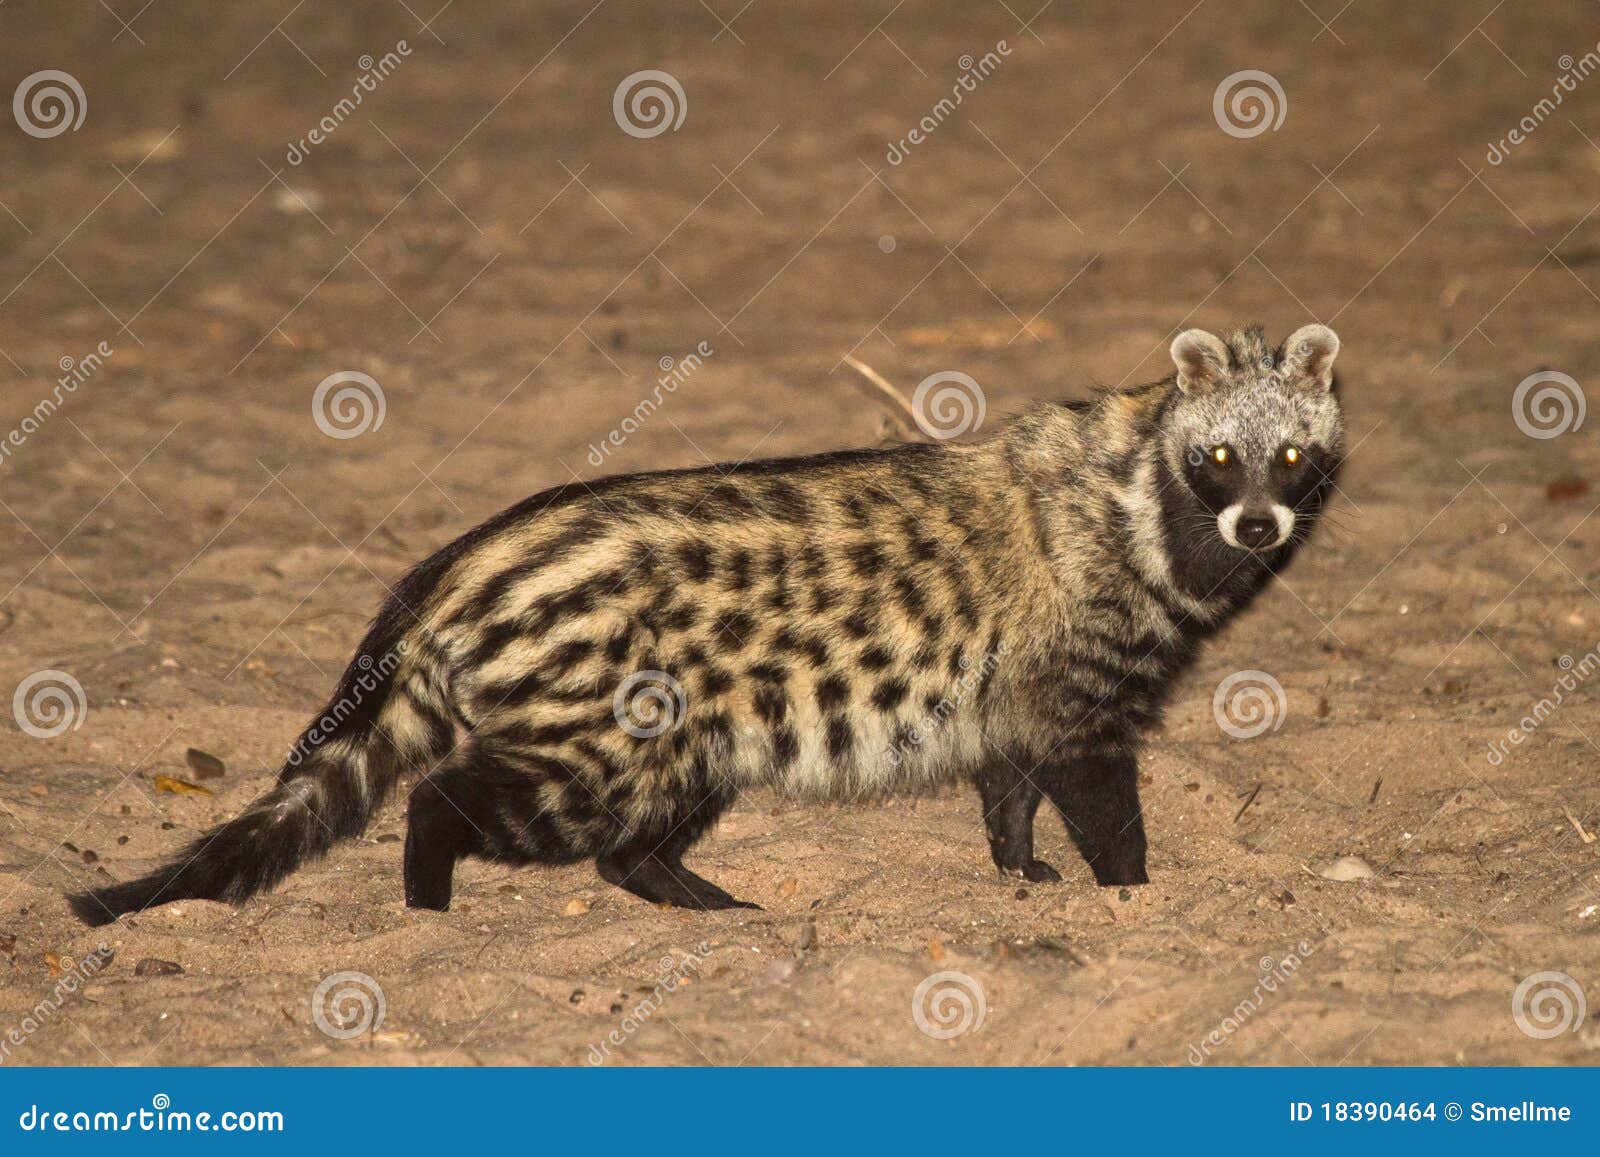 1 605 Civet Photos Free Royalty Free Stock Photos From Dreamstime